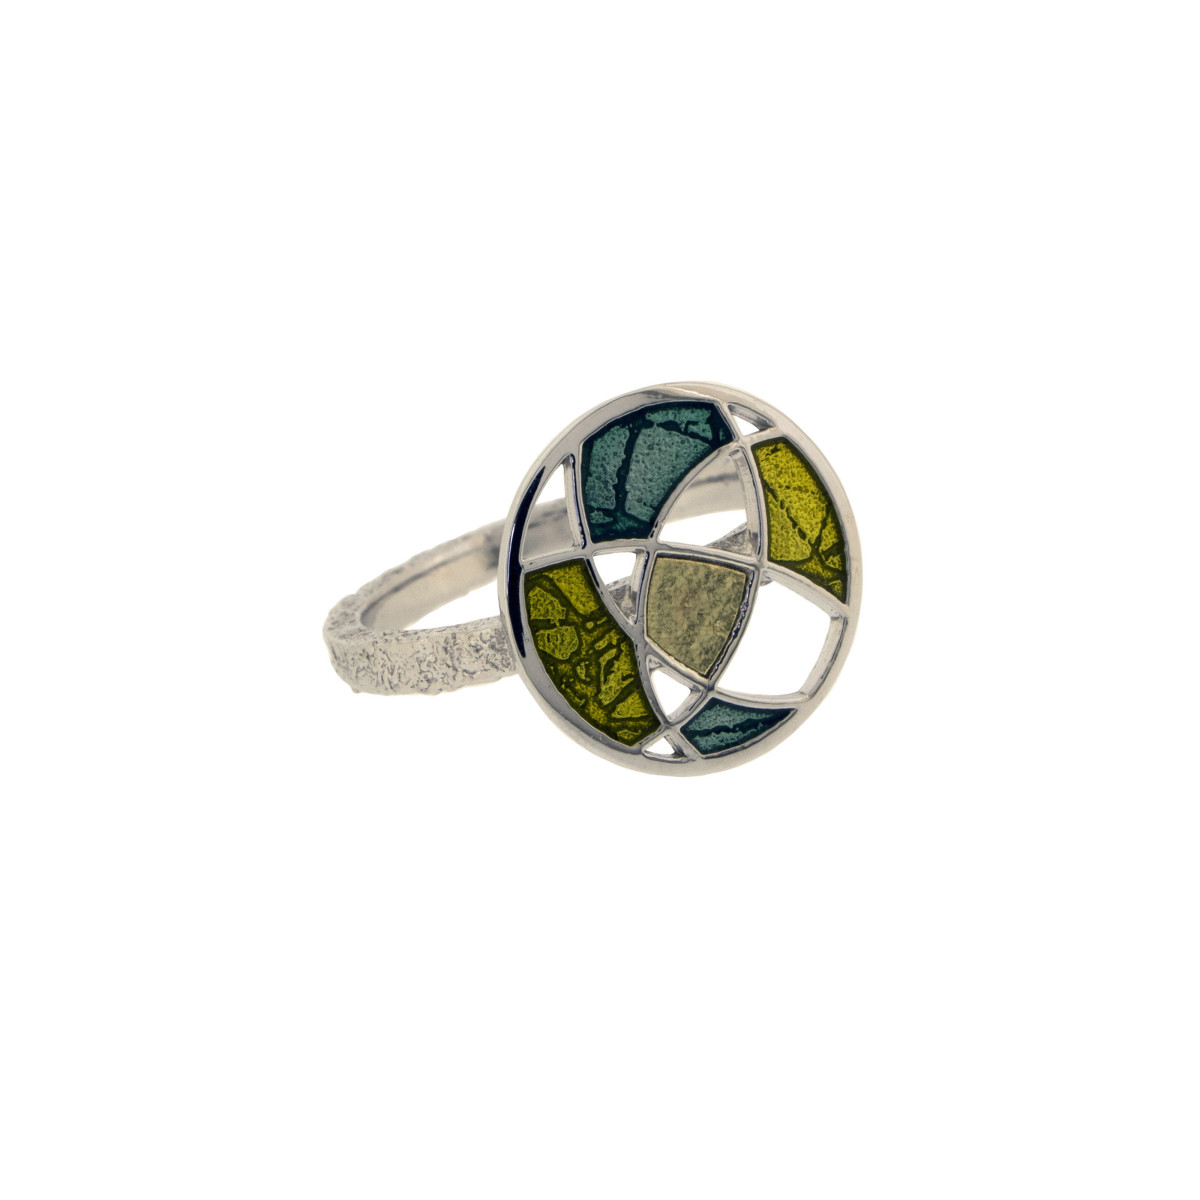 Silver and gold ring, enameled